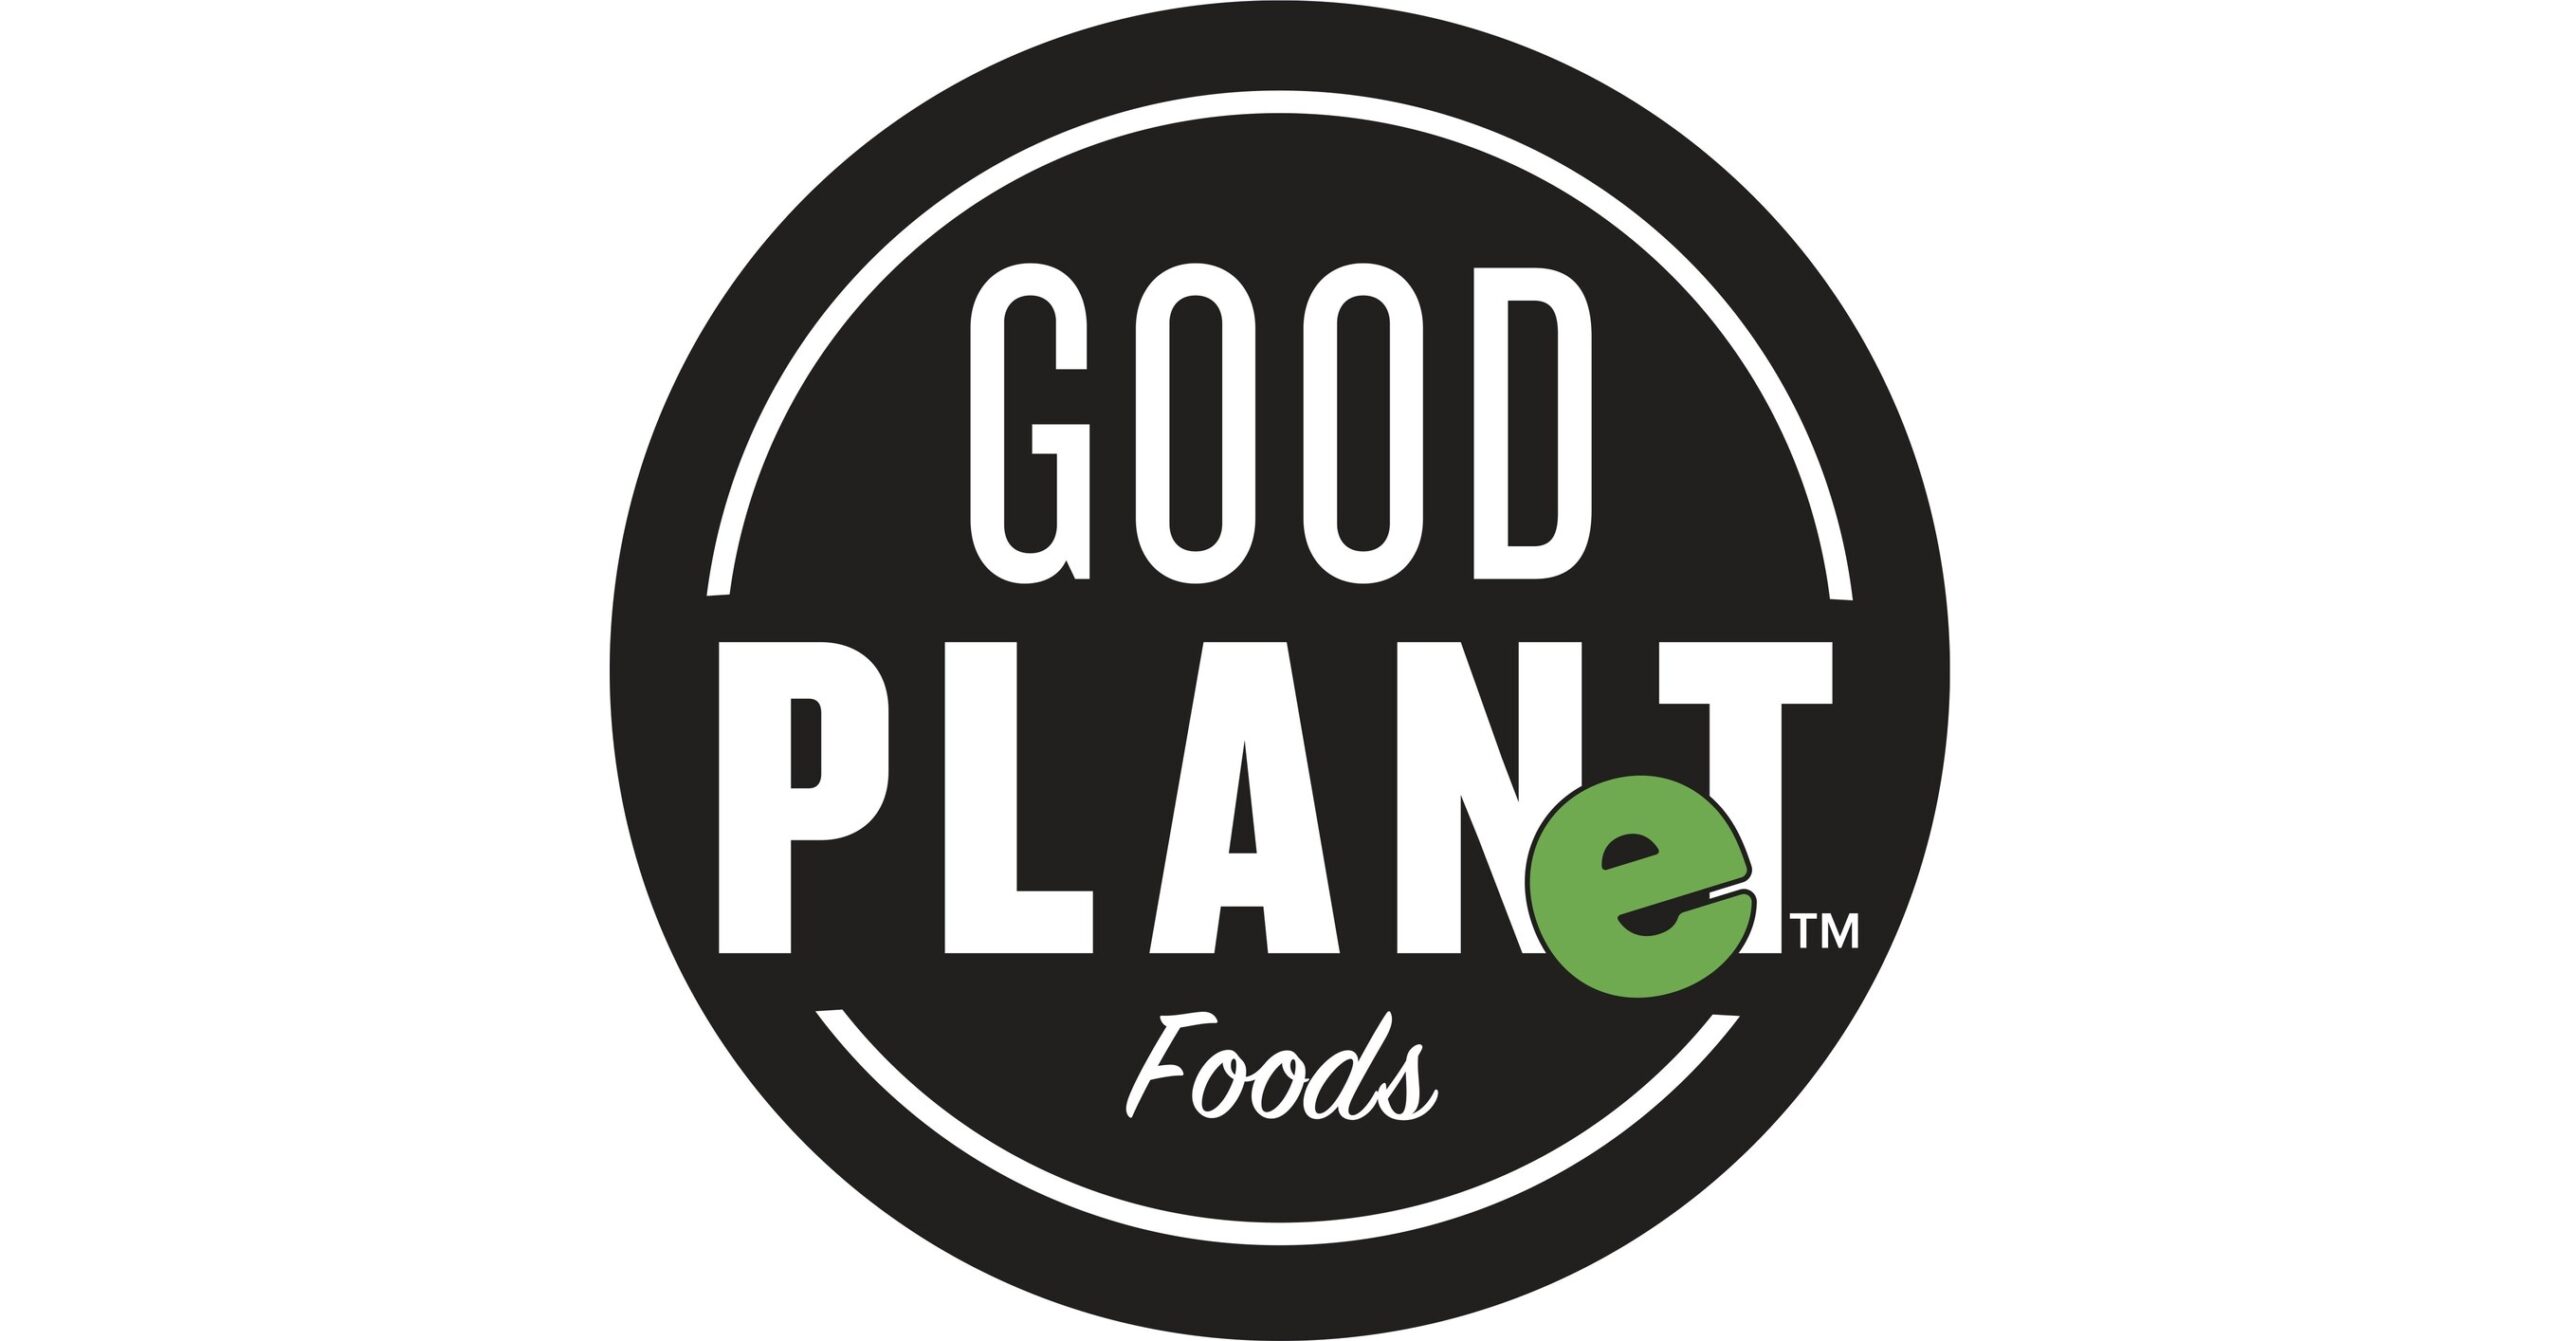 GOOD PLANeT Foods Releases Limited Edition White Cheddar & Cranberry Wheels and Wedges